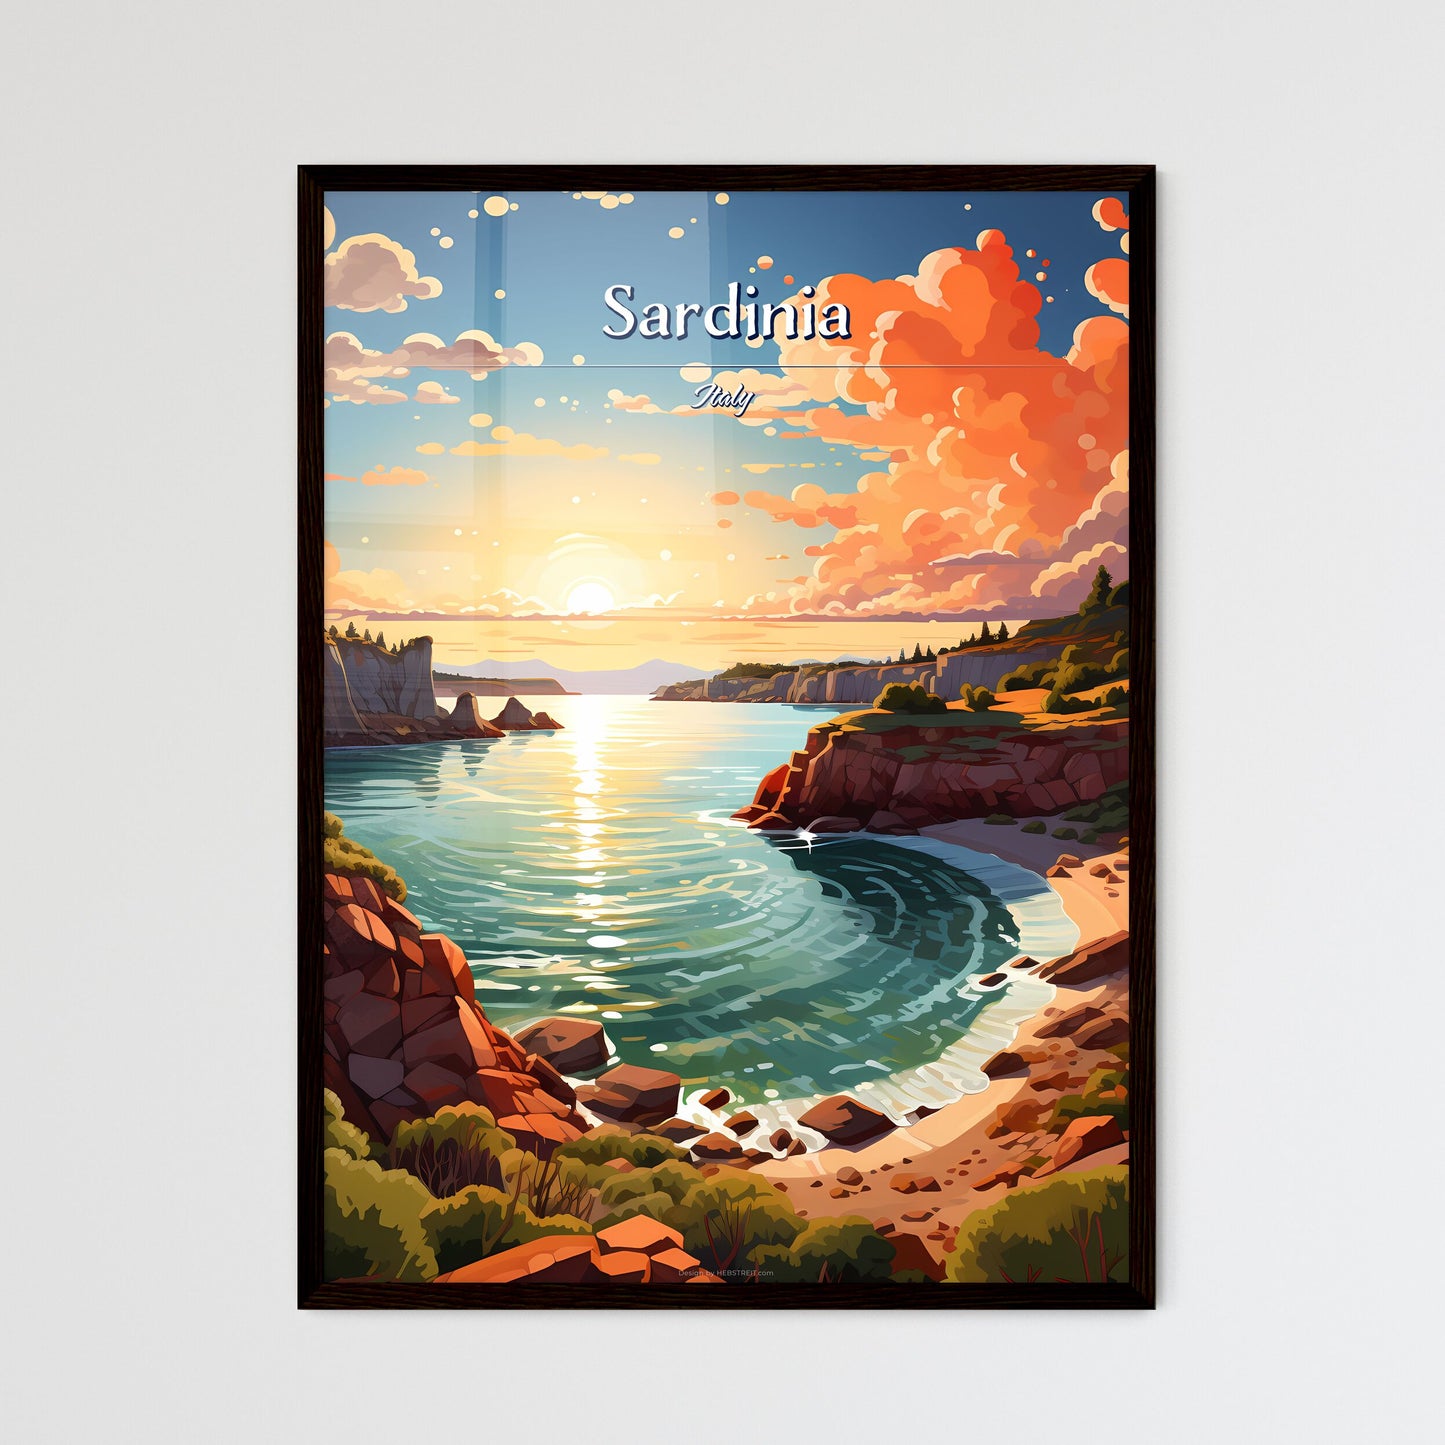 Sardinia, Italy - Art print of a landscape of a body of water with a rocky beach and trees Default Title